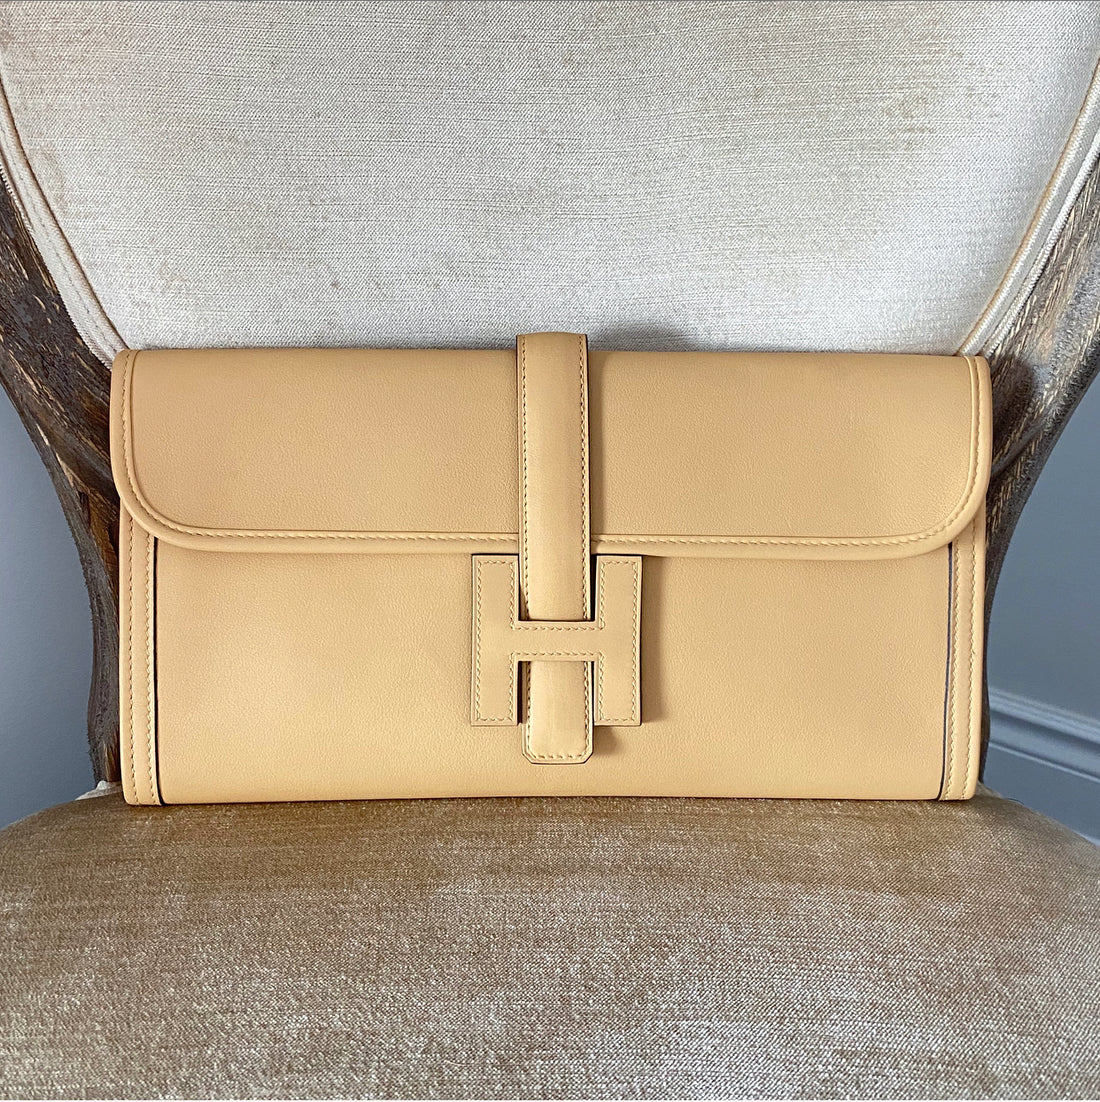 Hermès - Authenticated Clutch Bag - Leather Beige Plain for Women, Never Worn